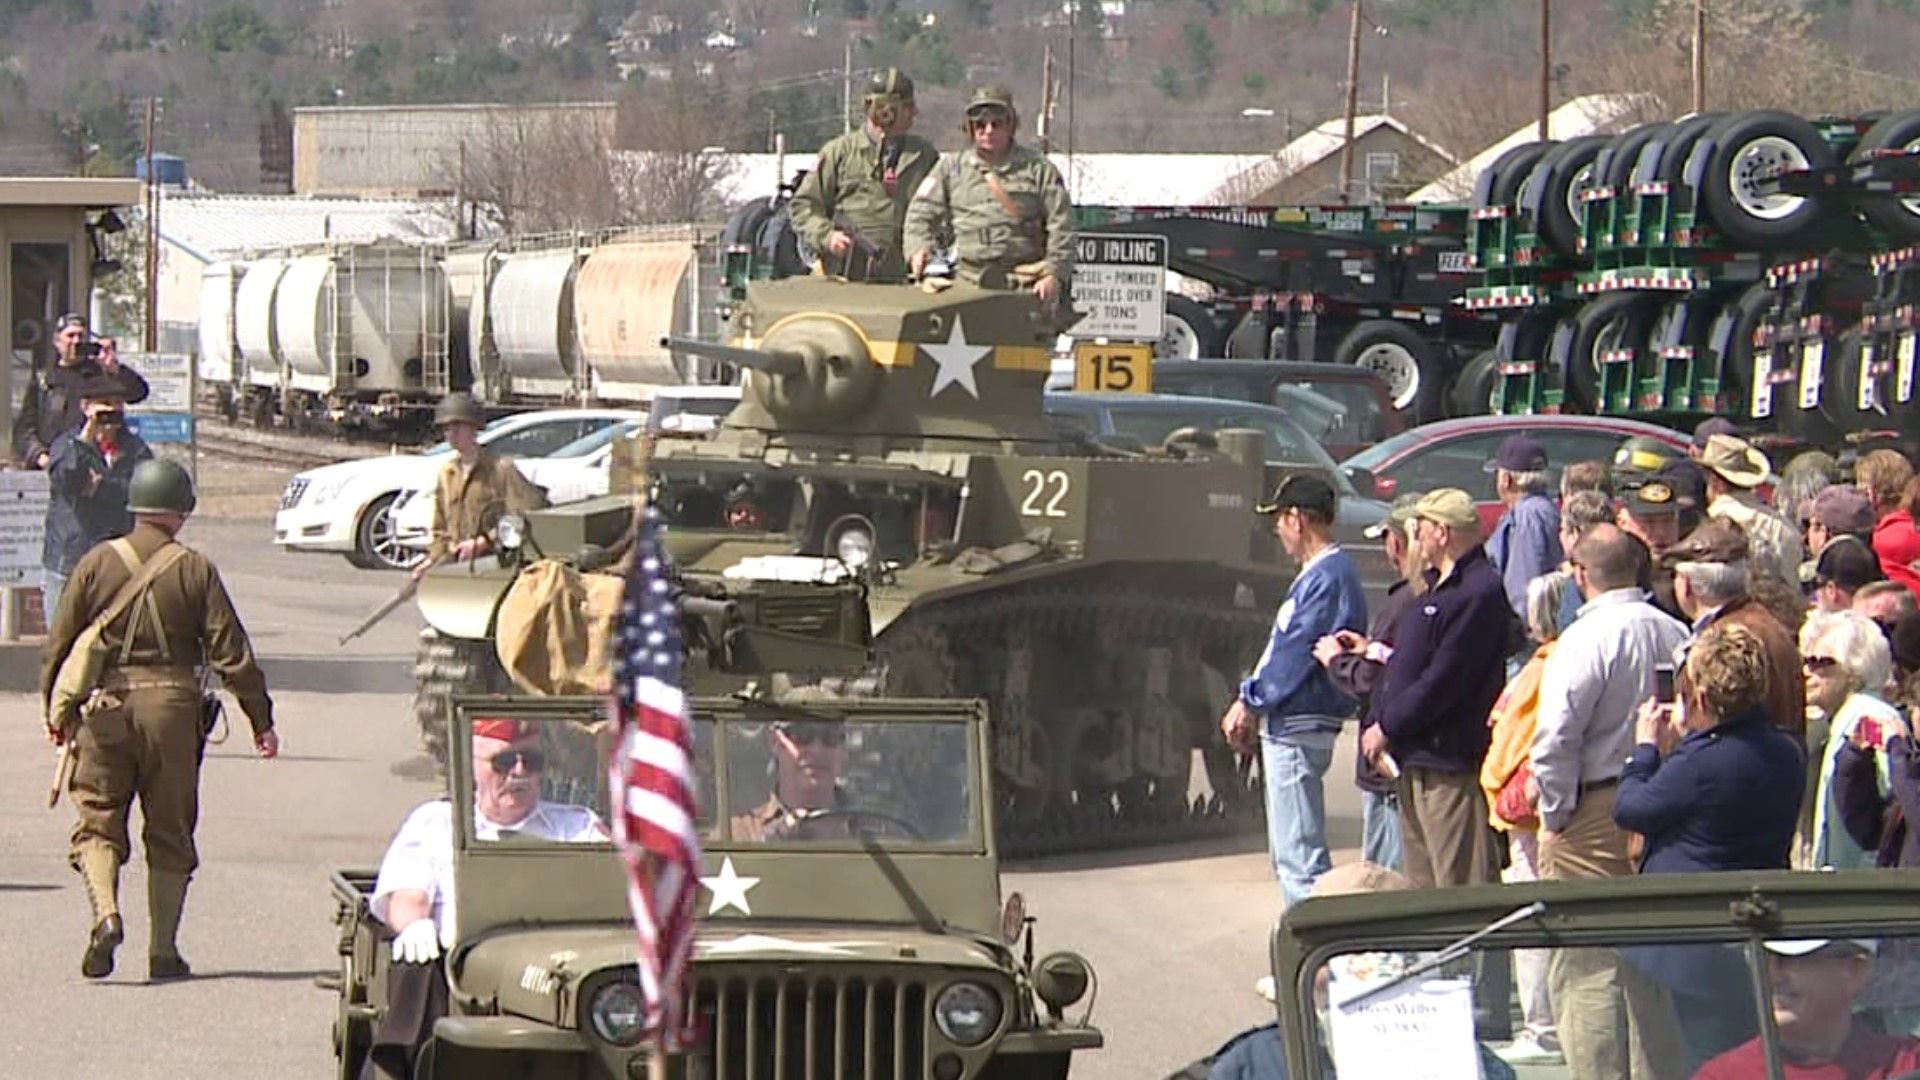 You can take a step back in time this weekend in part of Columbia County to celebrate the massive role this community played in World War II.